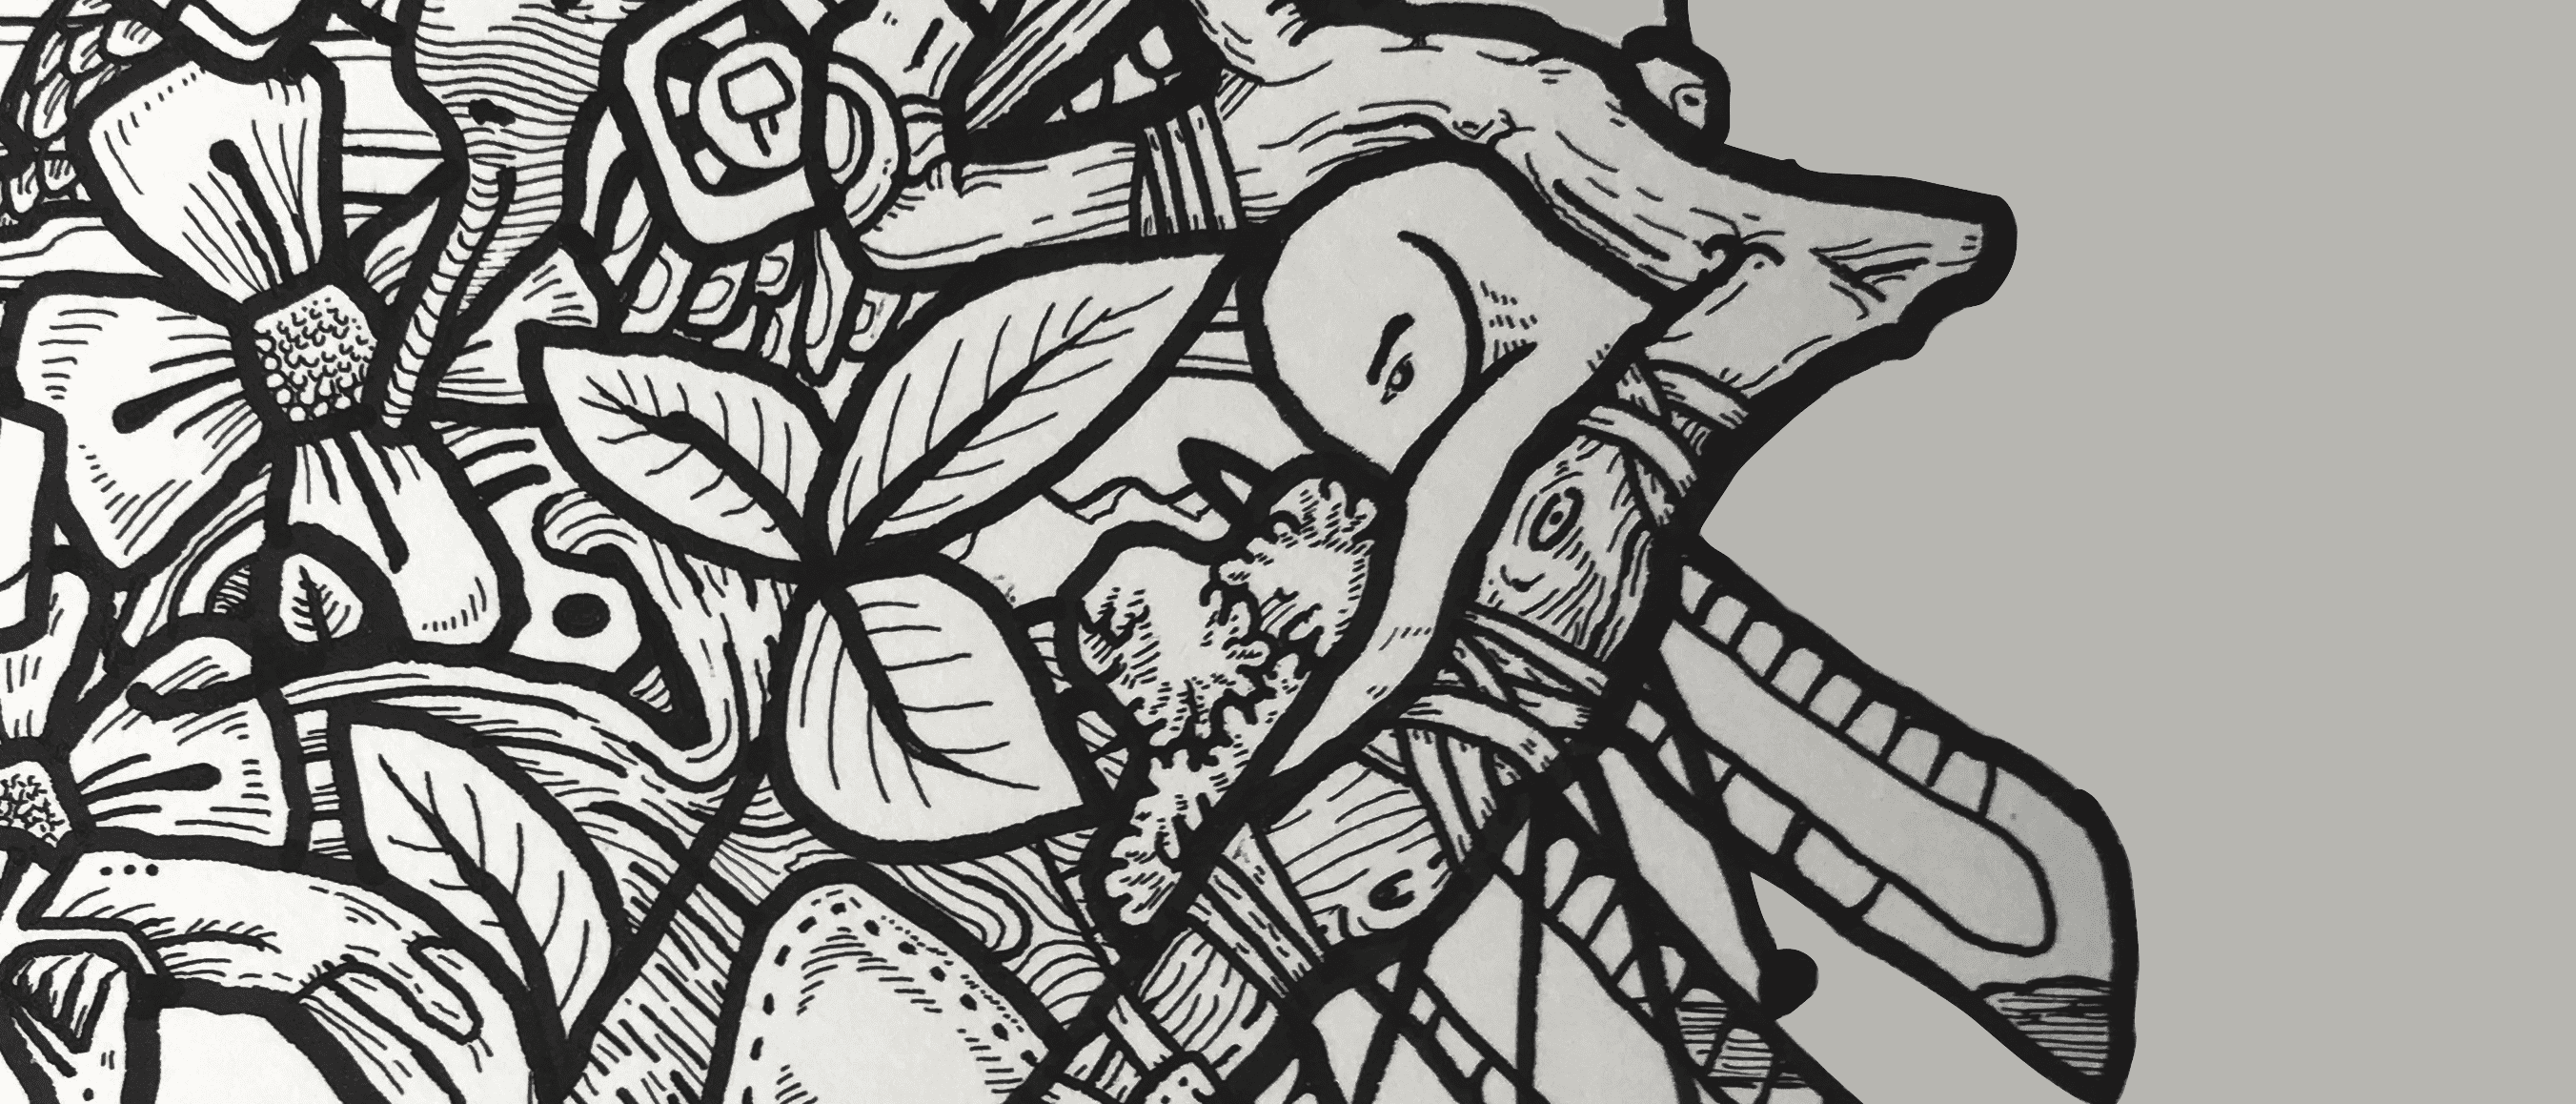 Closely cropped black ink artwork of branches, flowers and masked faces